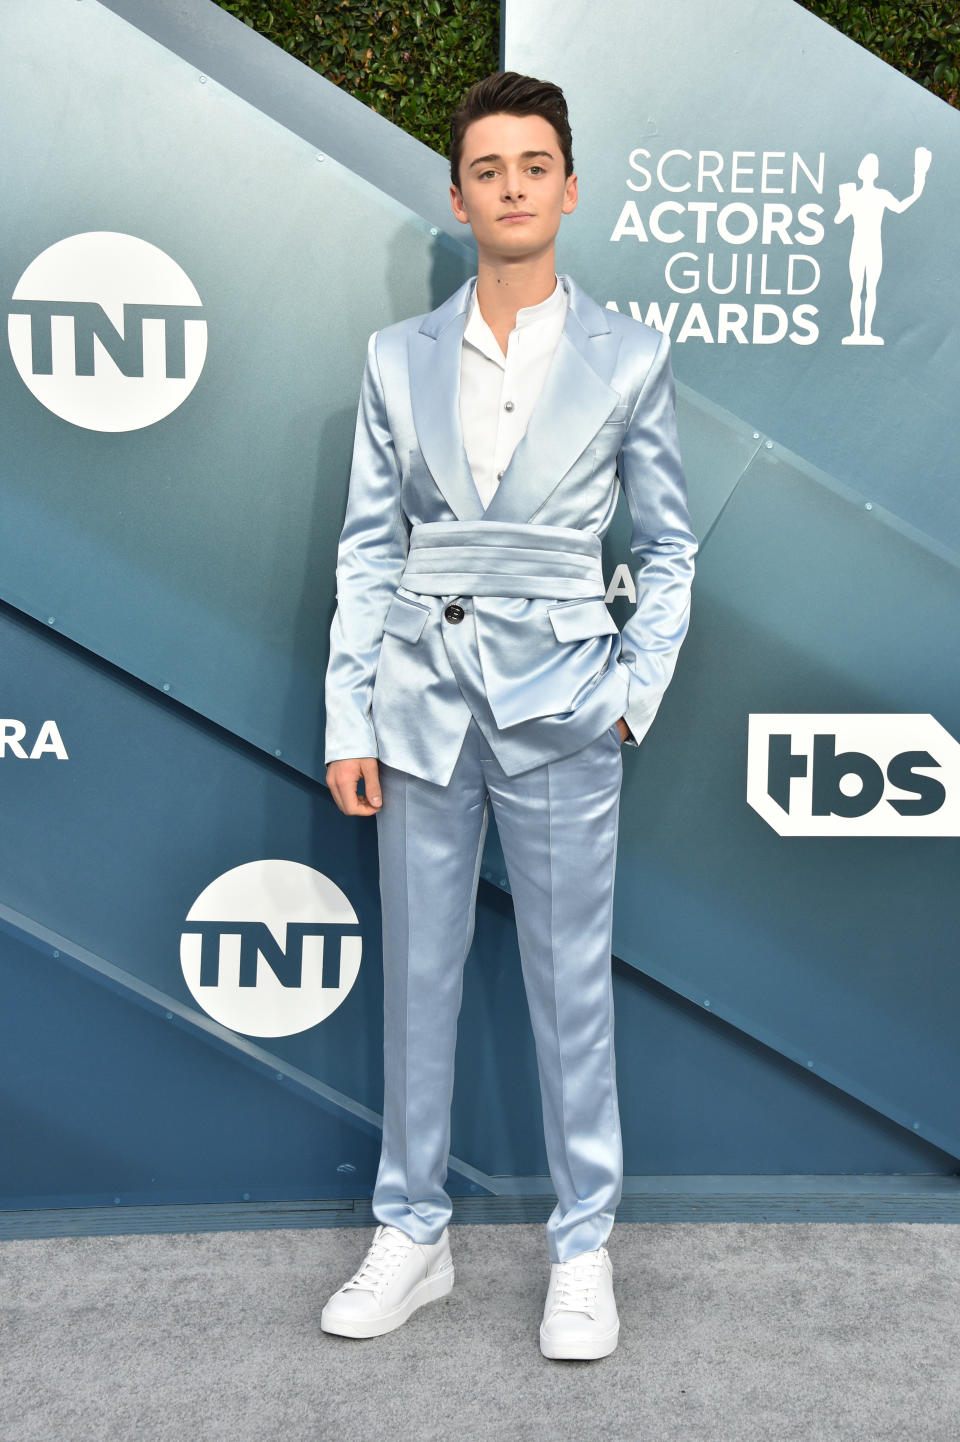 LOS ANGELES, CALIFORNIA - JANUARY 19: Noah Schnapp attends the 26th Annual Screen Actors Guild Awards at The Shrine Auditorium on January 19, 2020 in Los Angeles, California. 721430 (Photo by Gregg DeGuire/Getty Images for Turner)